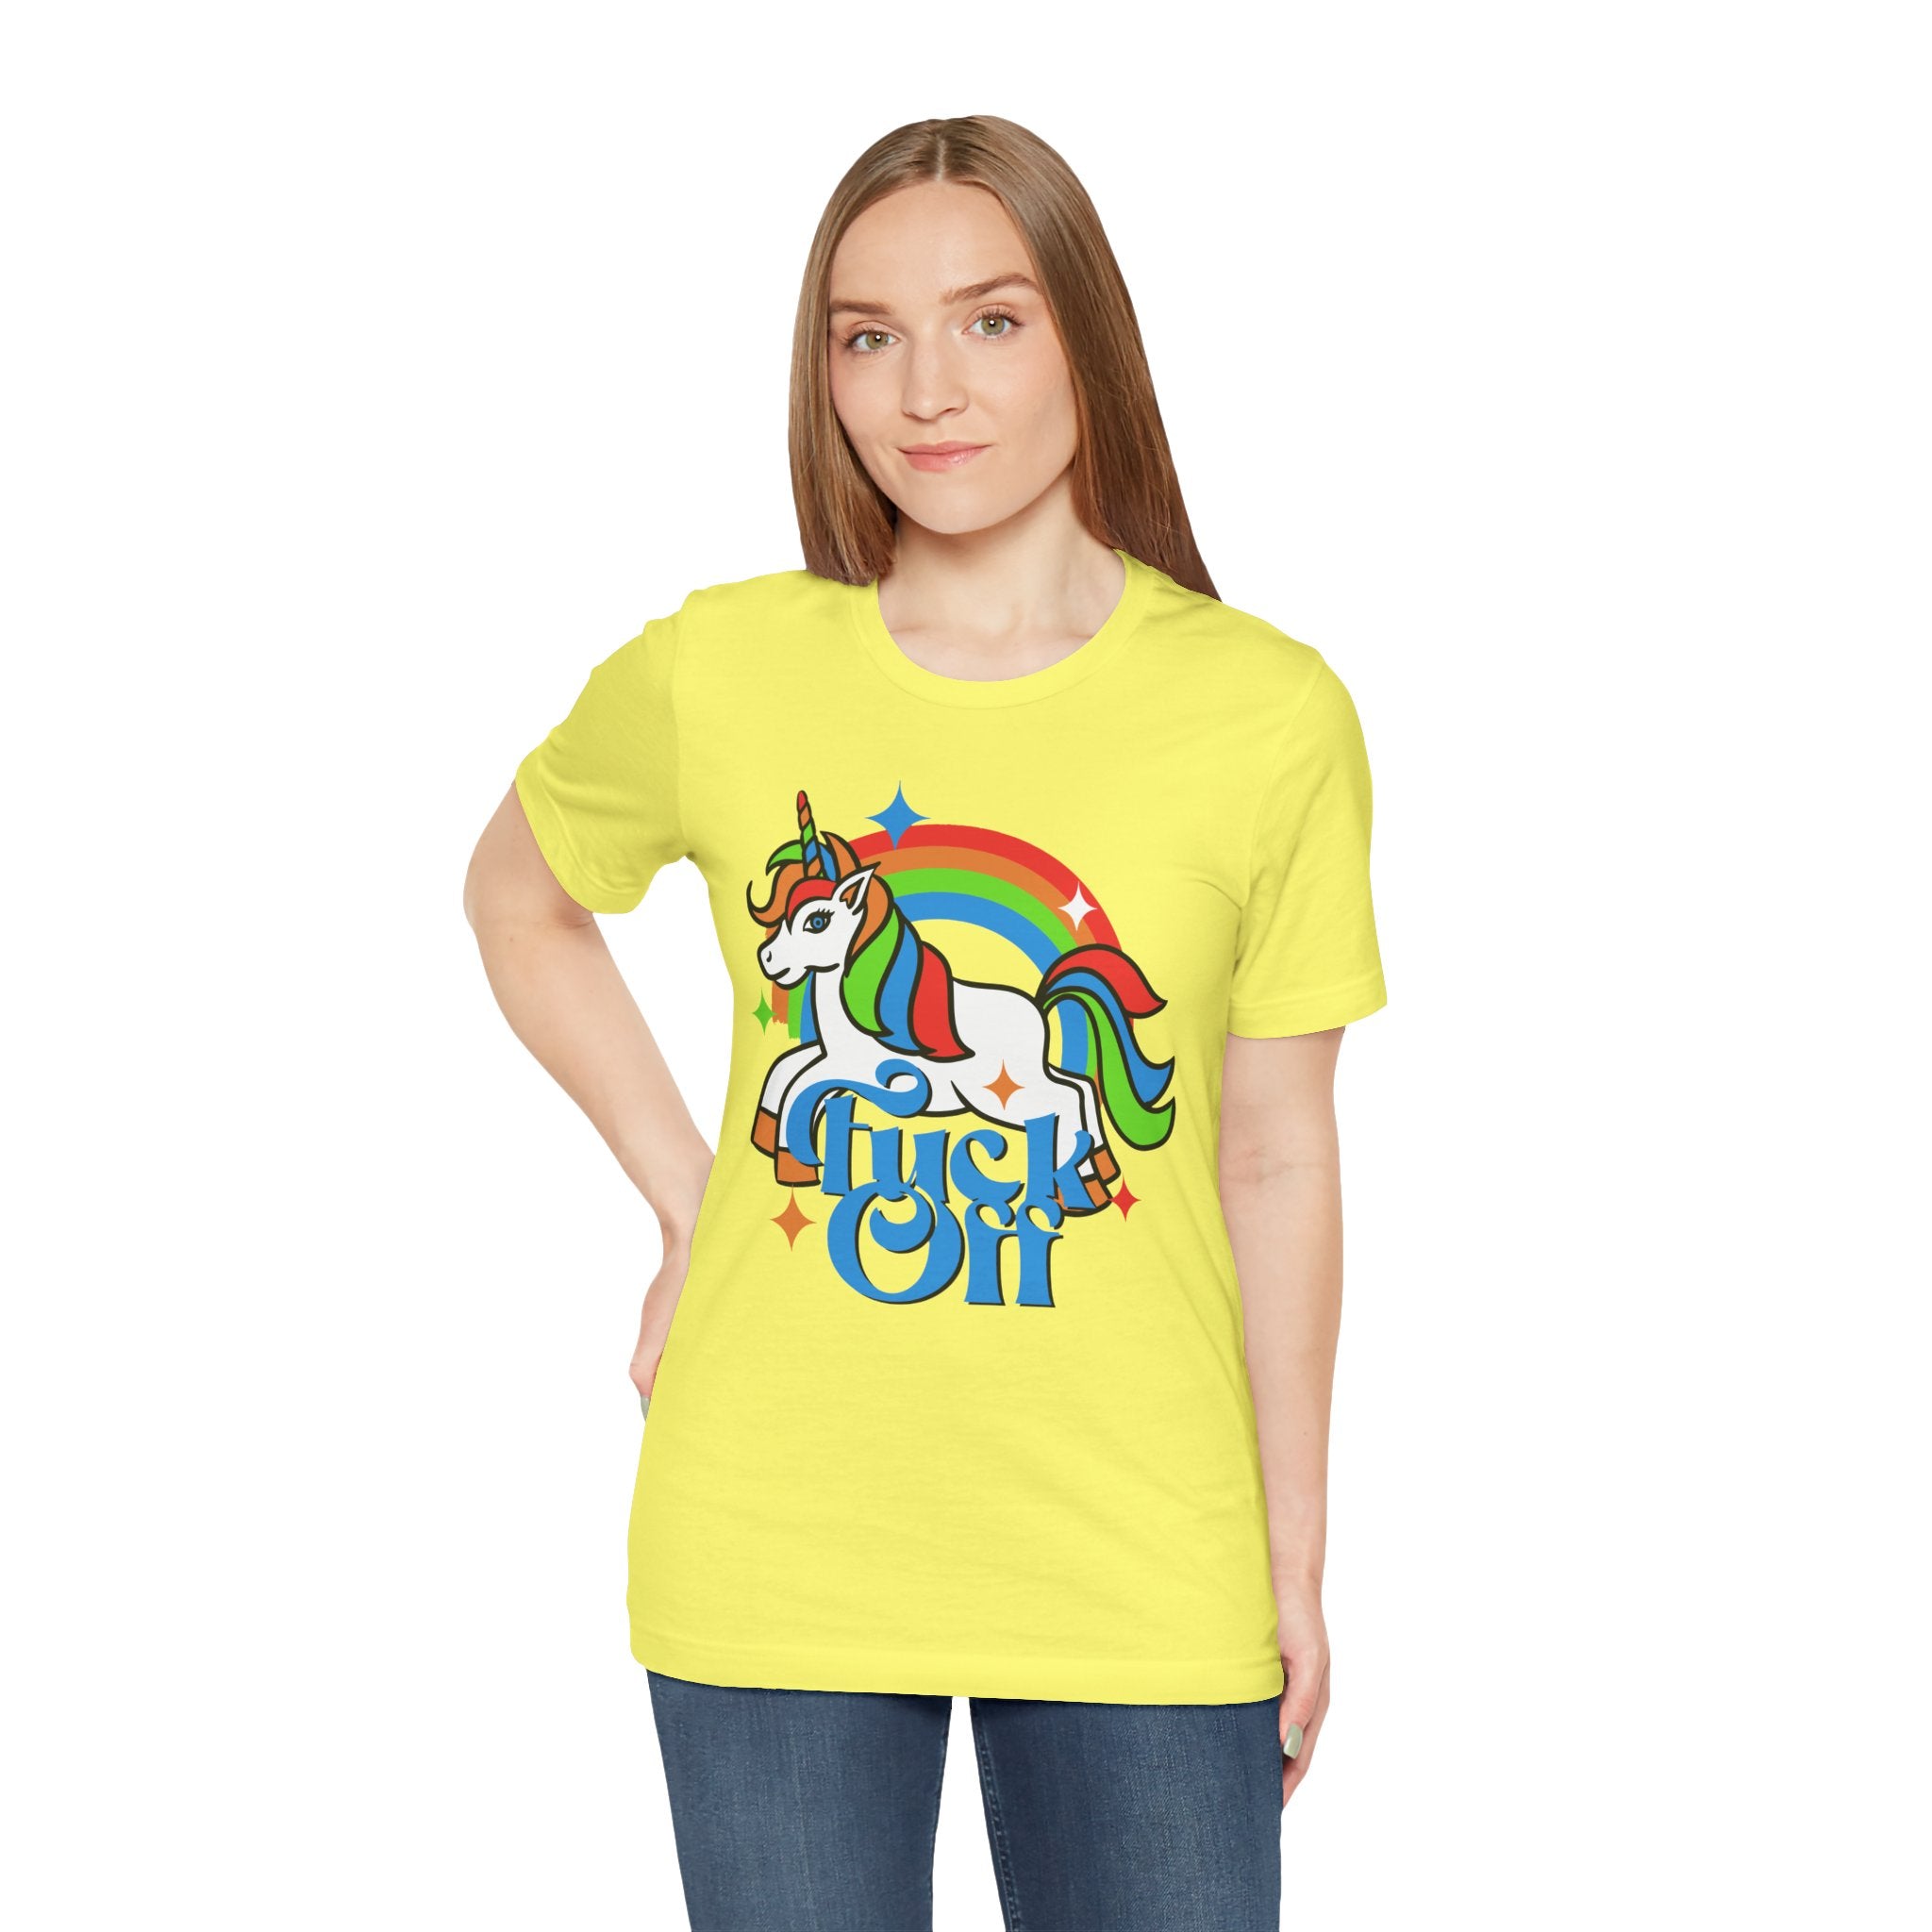 Woman in a yellow F off T-shirt featuring a colorful unicorn and a rainbow with the text "mystical.